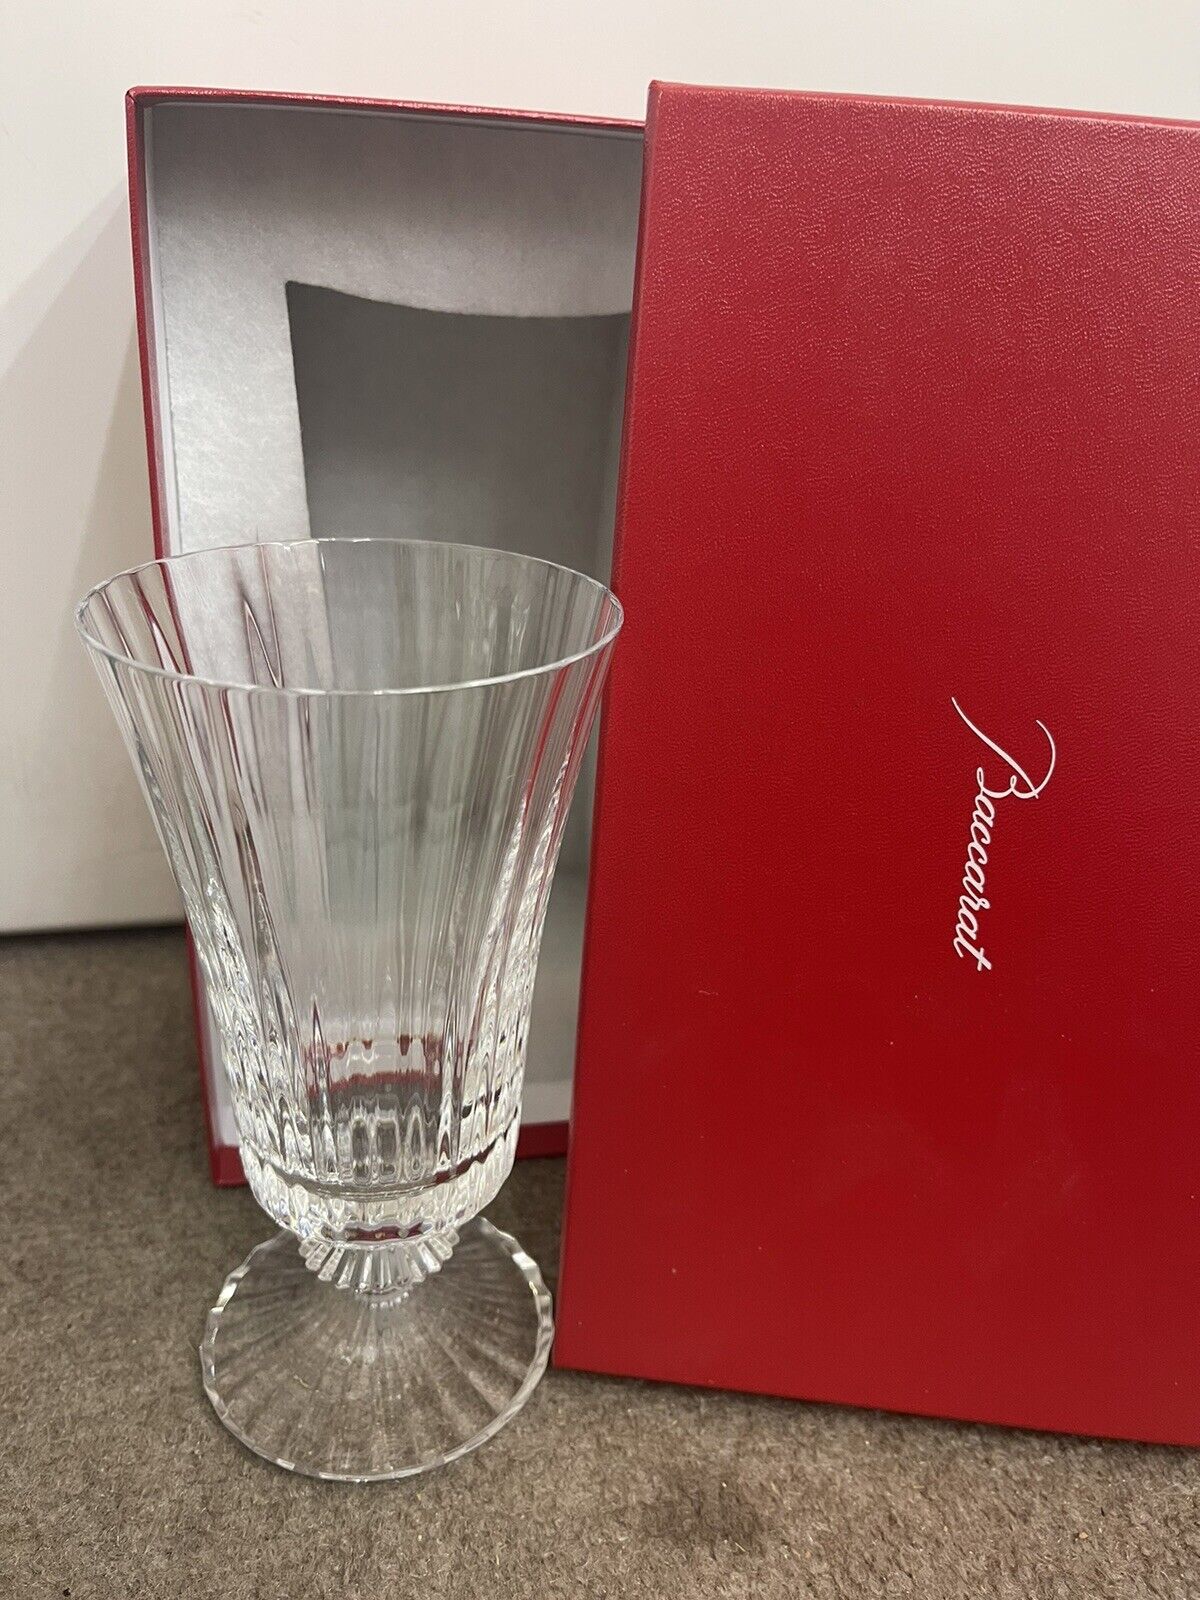 NIB NEW FLAWLESS BACCARAT France MILLE NUITS Crystal Tall Glass (B8) Brand New